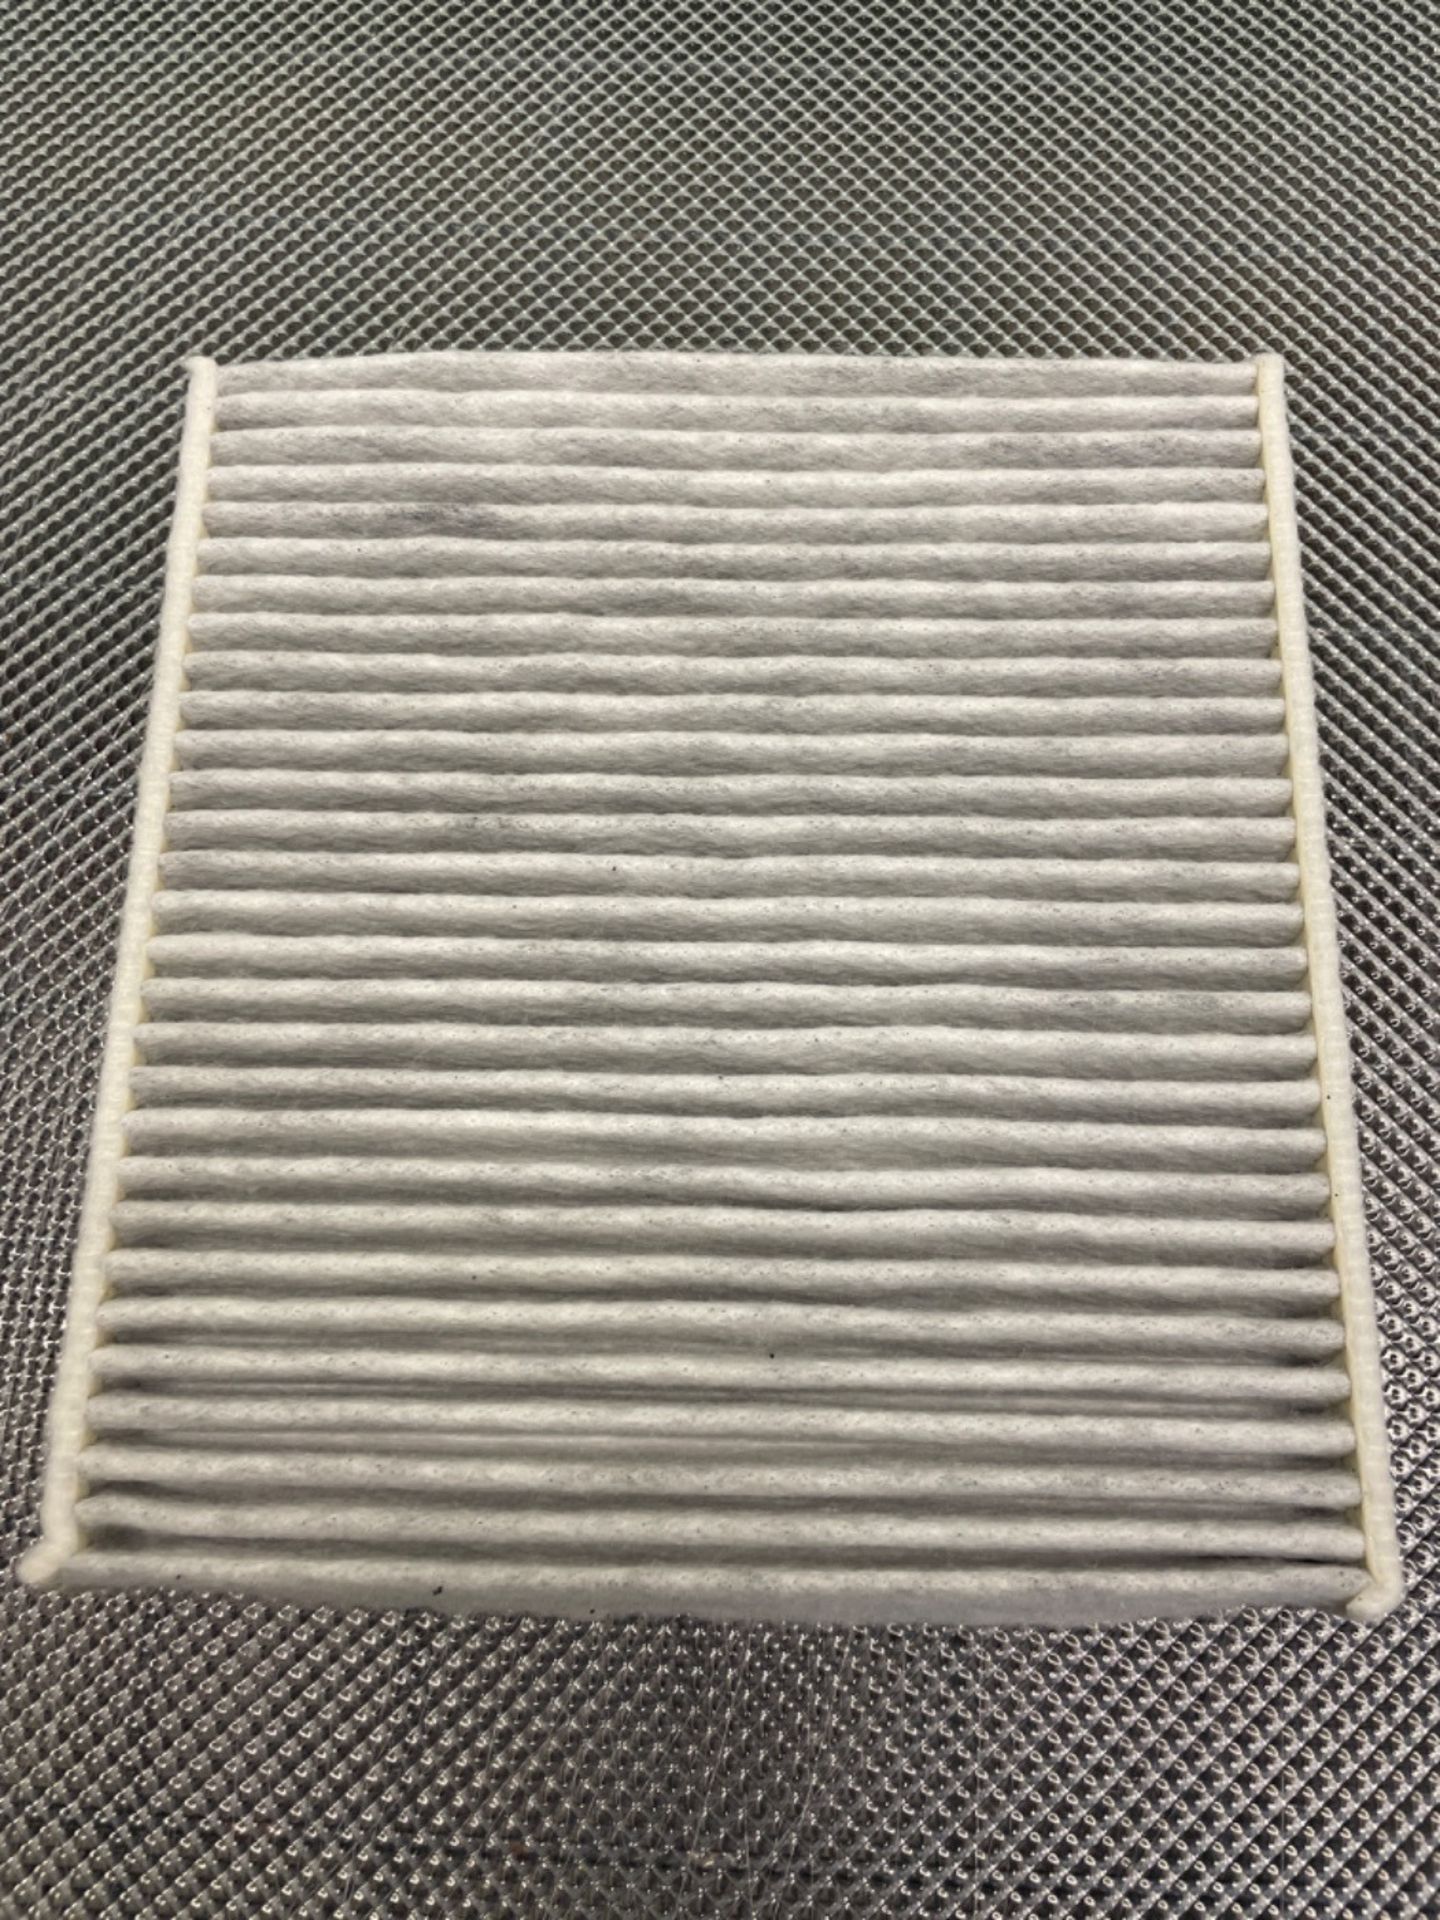 Bosch R2543 - Cabin Filter activated-carbon - Image 3 of 3